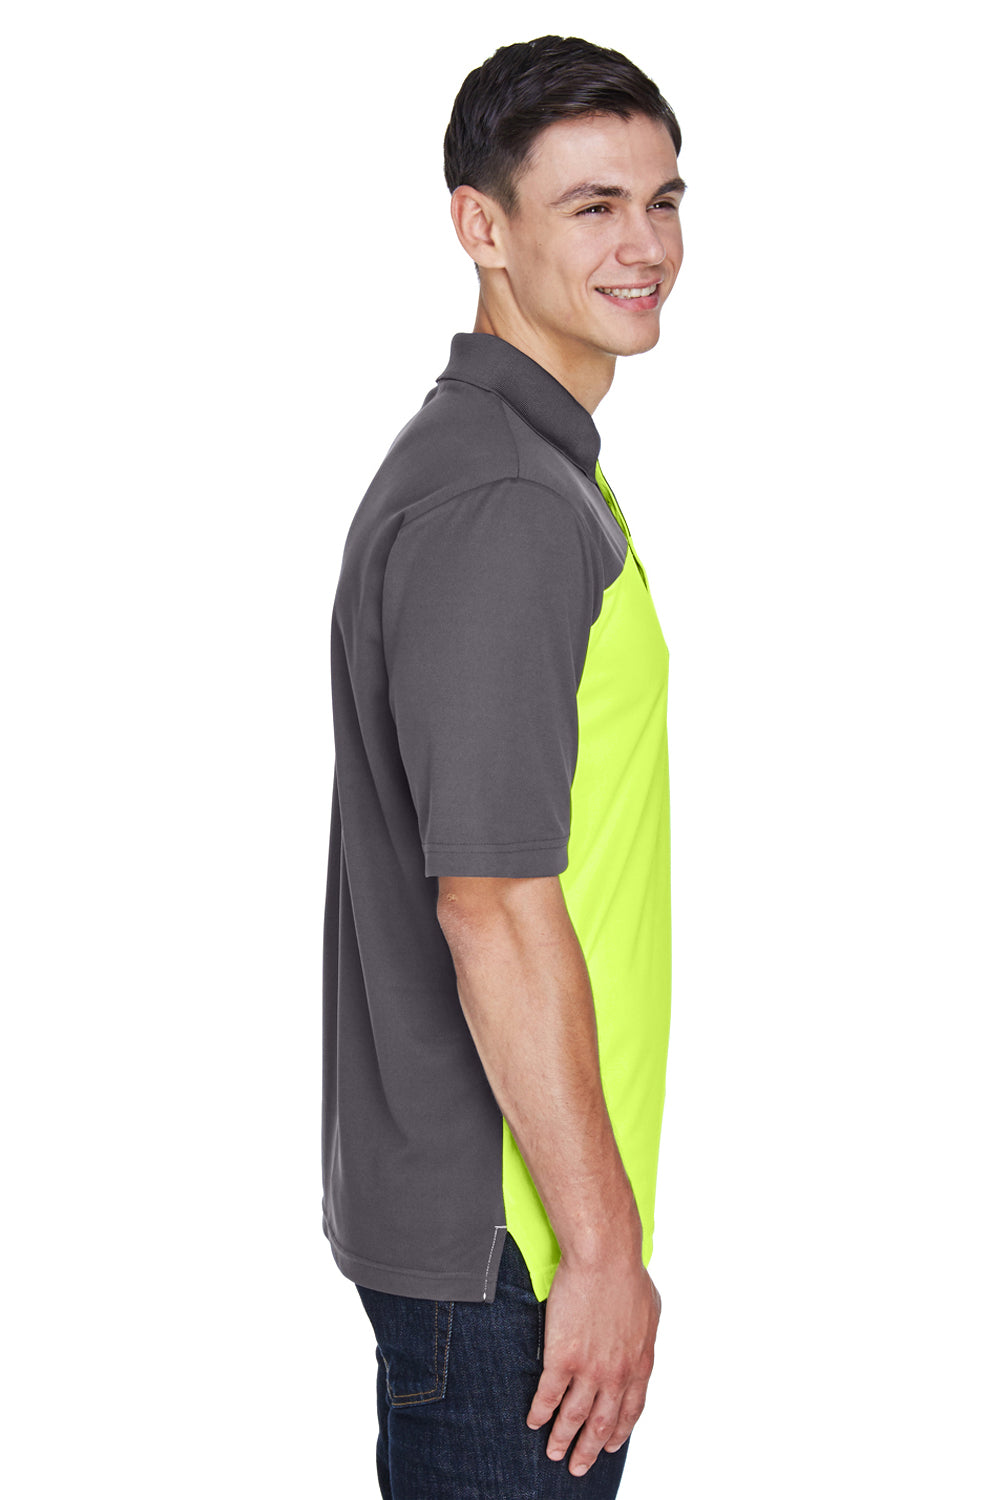 Core 365 CE101 Mens Balance Performance Moisture Wicking Short Sleeve Polo Shirt Safety Yellow/Grey Side